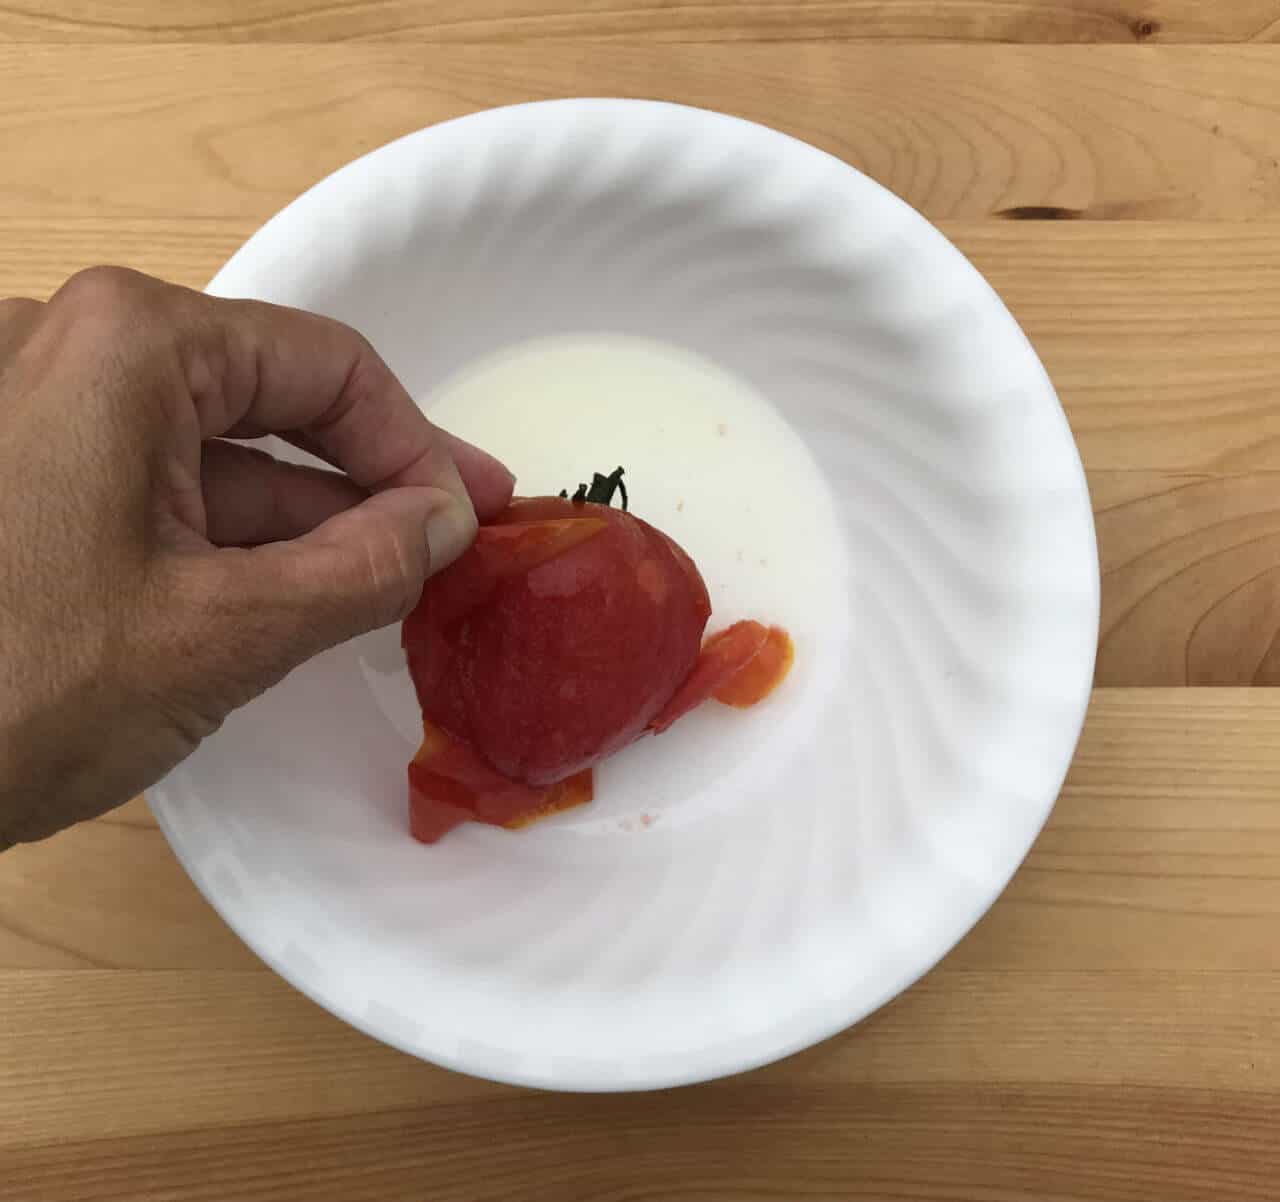 Peeling a thawed tomato | freezing tomatoes | preserving tomatoes